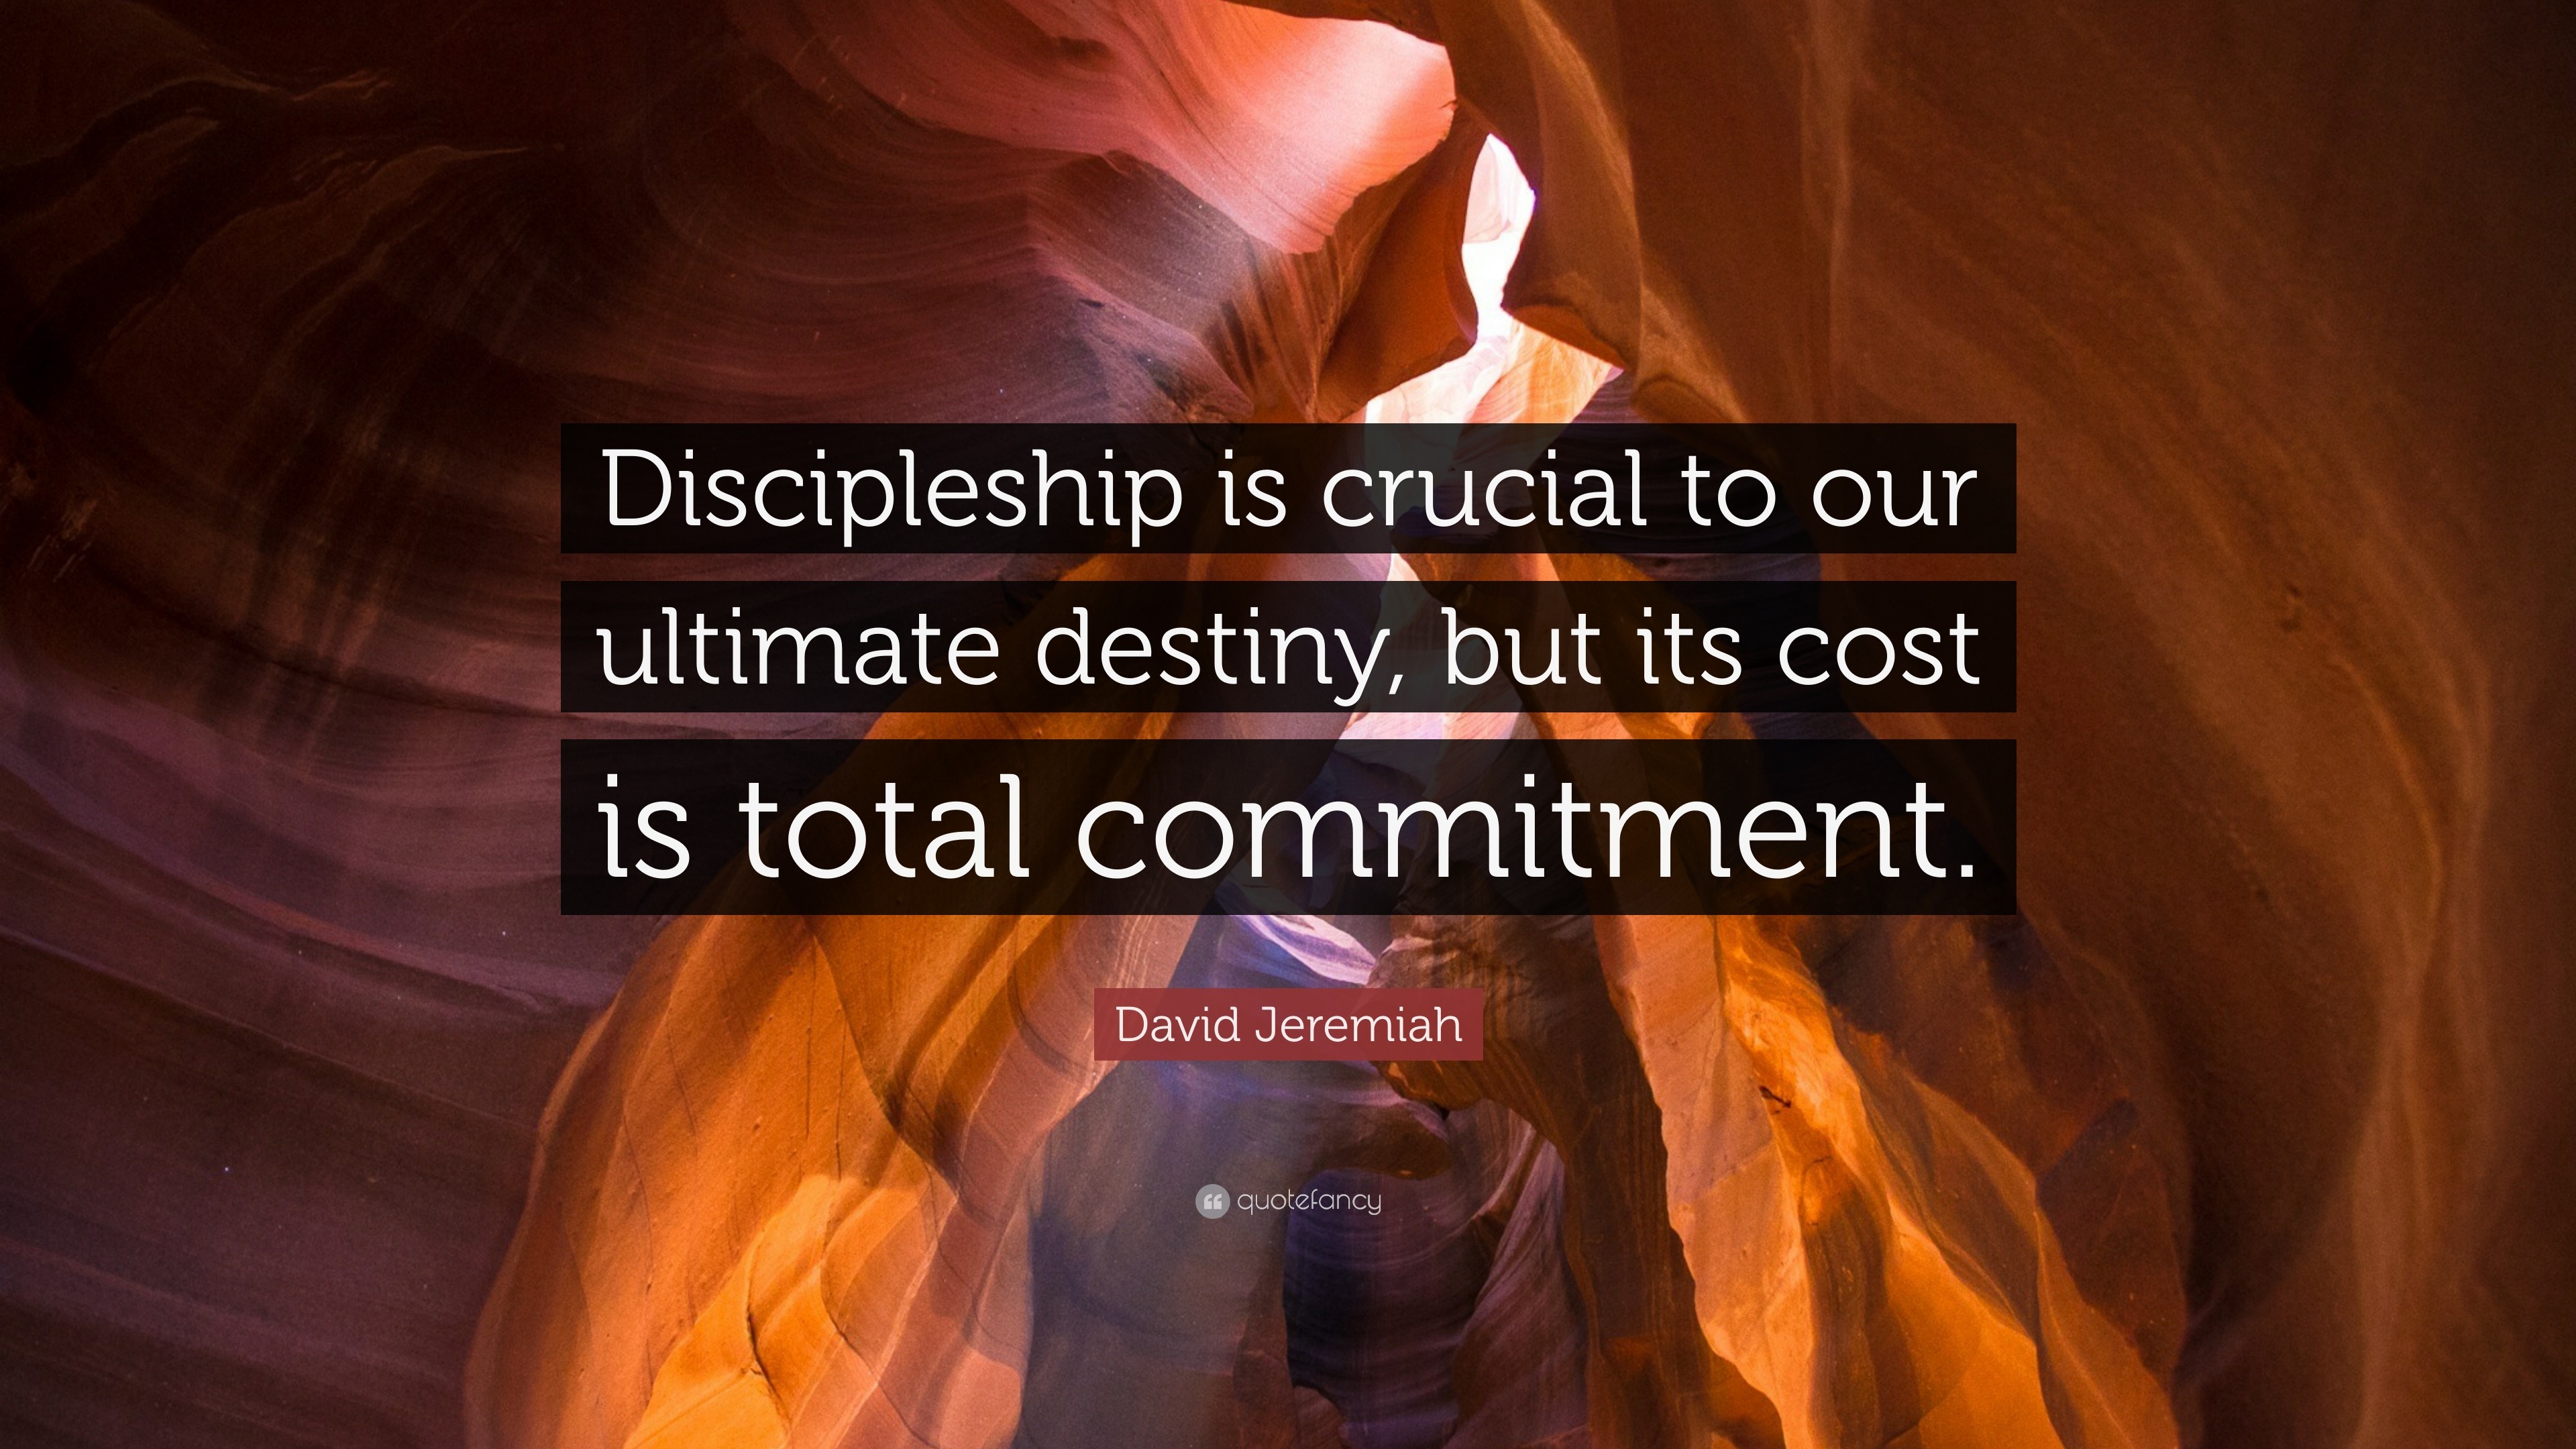 David Jeremiah Quote “Discipleship is crucial to our ultimate destiny